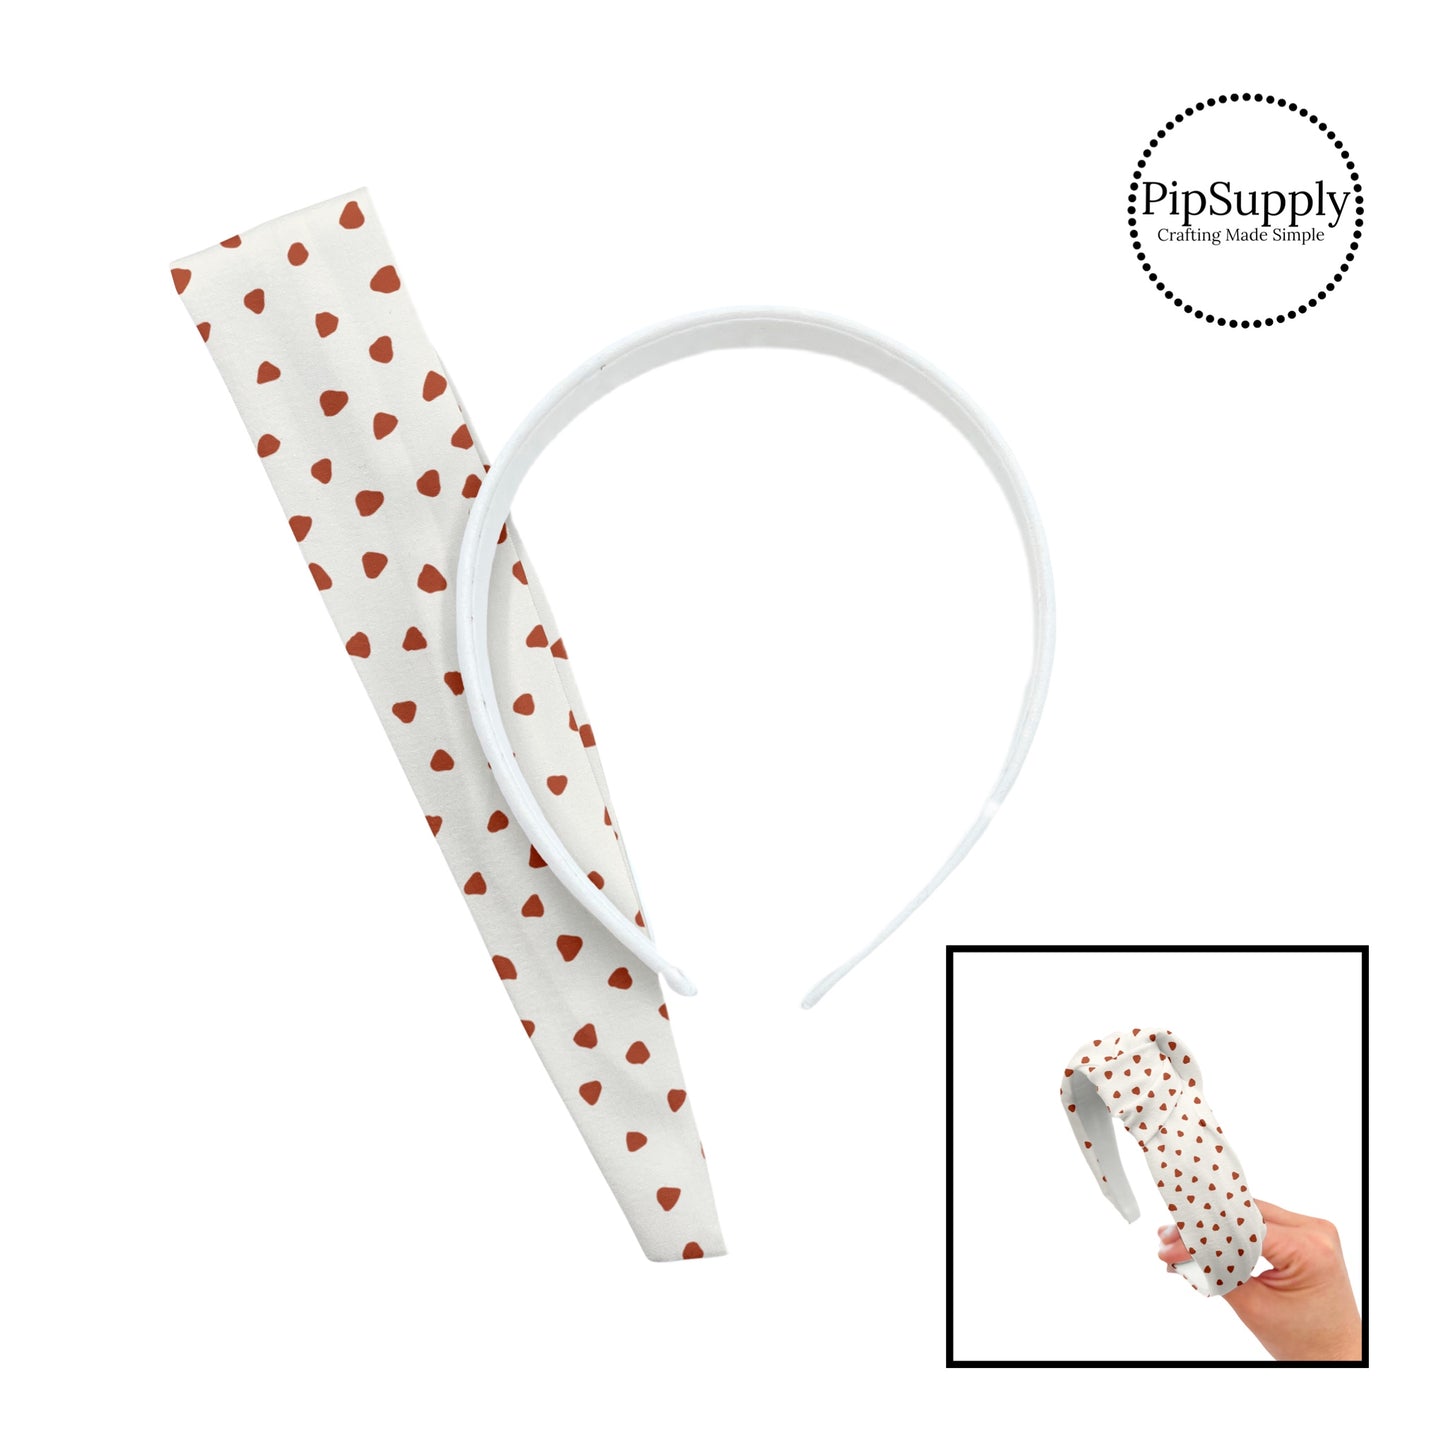 These speckled themed headband kits are easy to assemble and come with everything you need to make your own knotted headband. These kits include a custom printed and sewn fabric strip and a coordinating velvet or ribbed headband. The headband kits features small brown speckled dots on ivory.